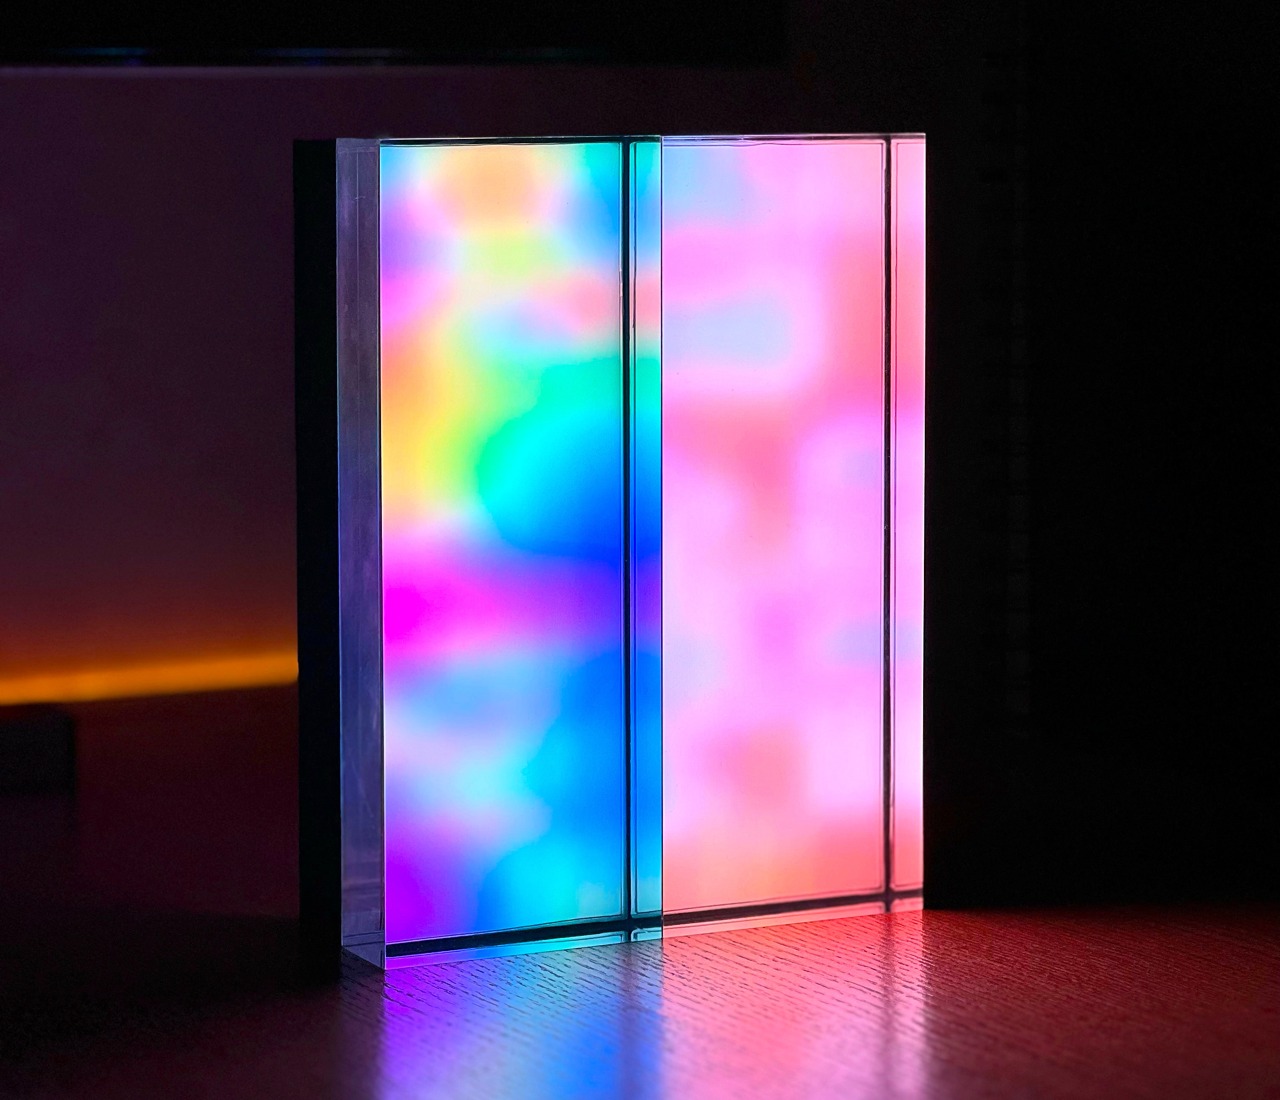 The perfect smart lamp for 2023: Moonside Neon Crystal Cube is a sleek, modular lamp with a vibrant character